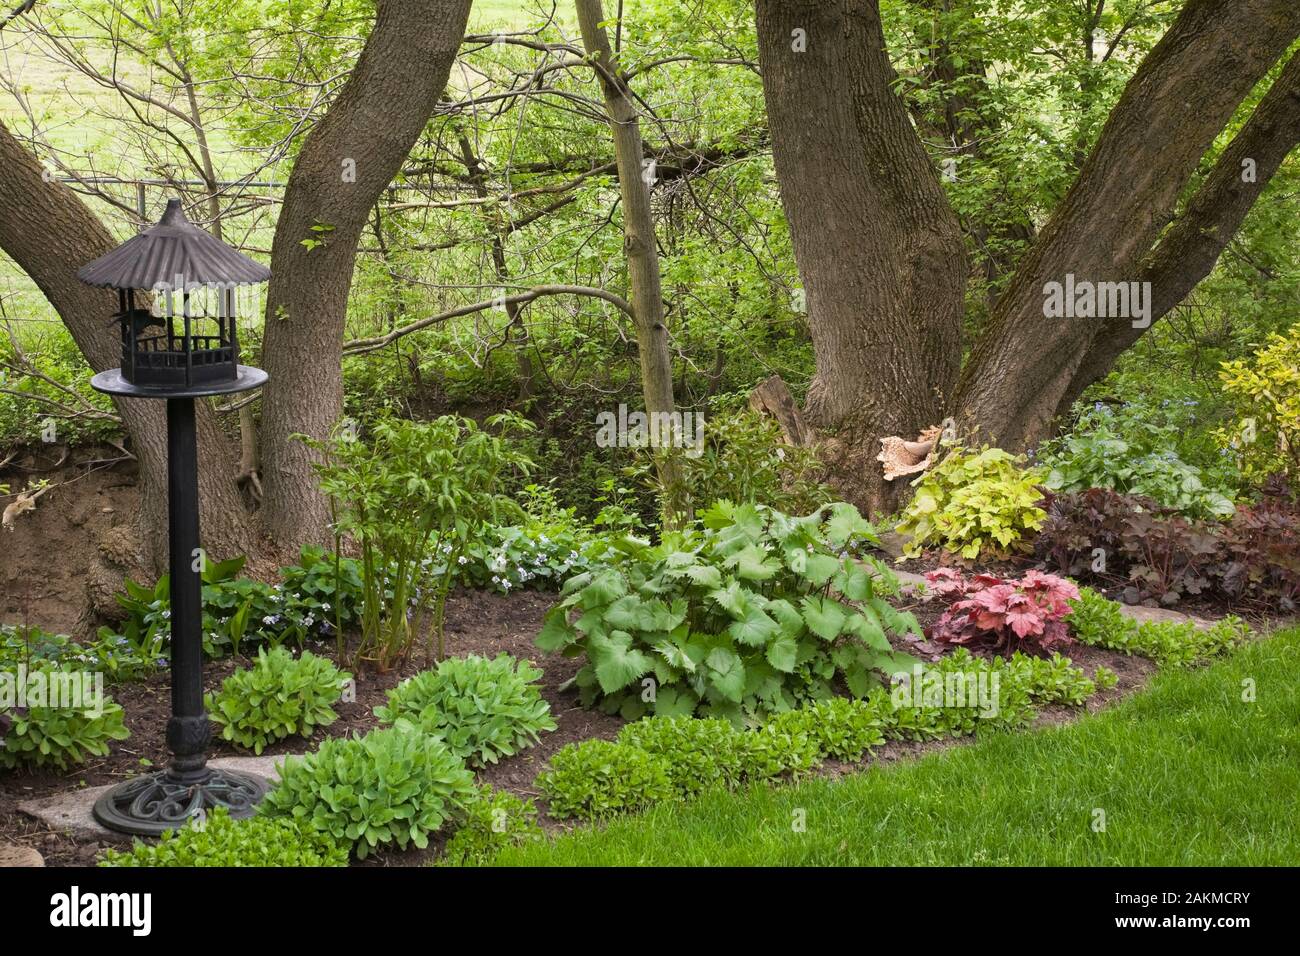 Black metal pedestal bird feeder in border with mixed shrubs, plants and flowers including Paeonia - Peonies, Hylotelephium spectabile - Stonecrops. Stock Photo